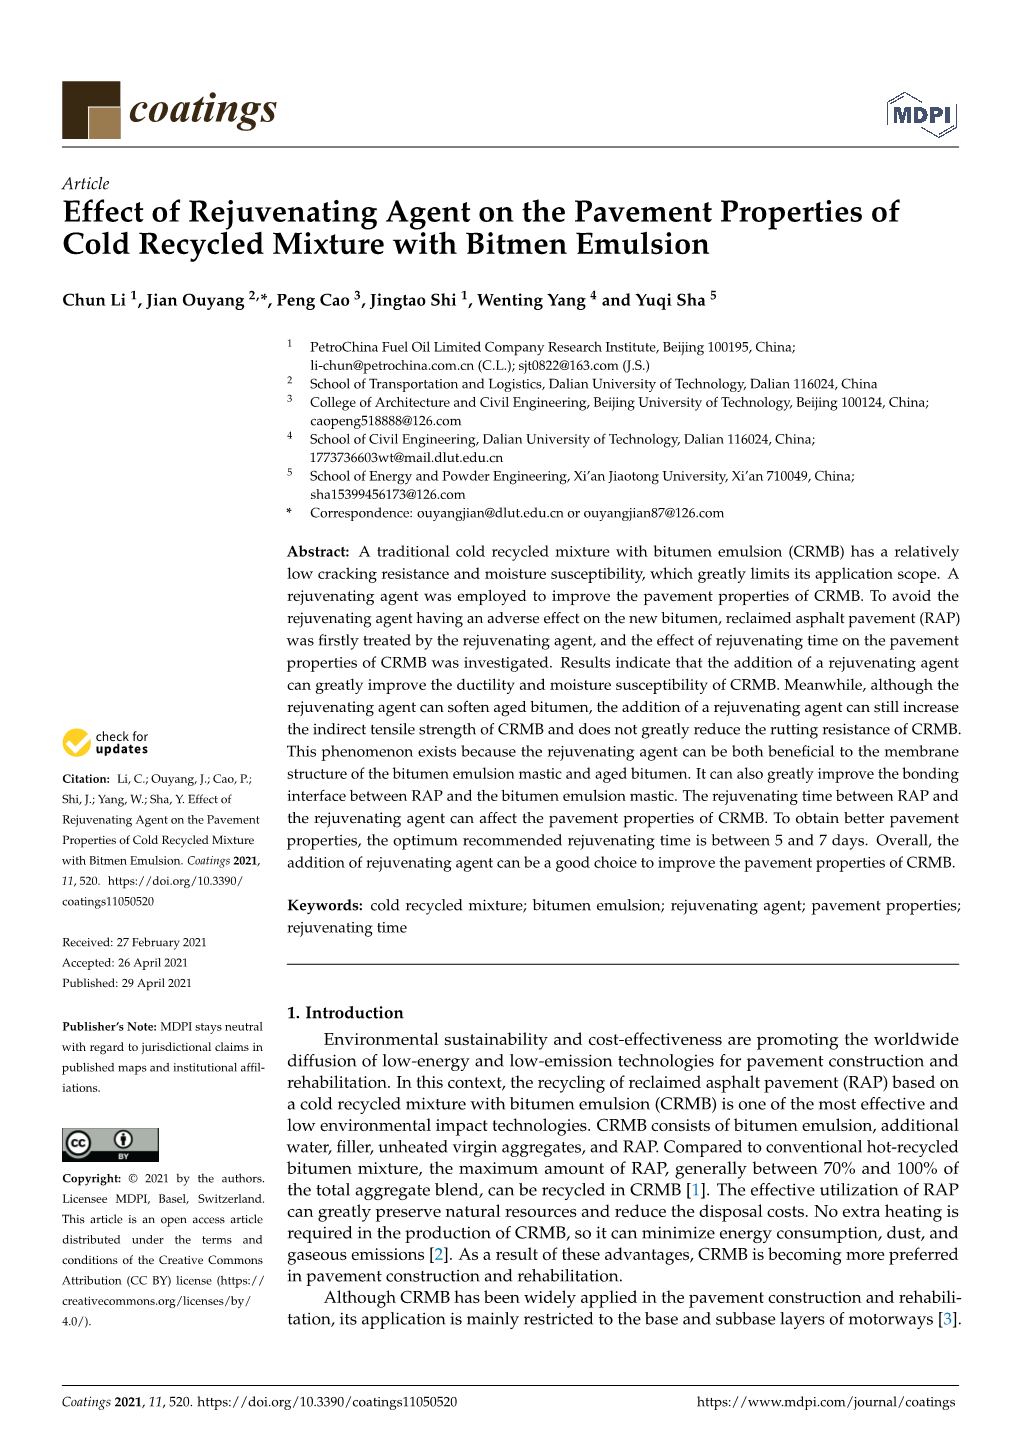 Effect of Rejuvenating Agent on the Pavement Properties of Cold Recycled Mixture with Bitmen Emulsion